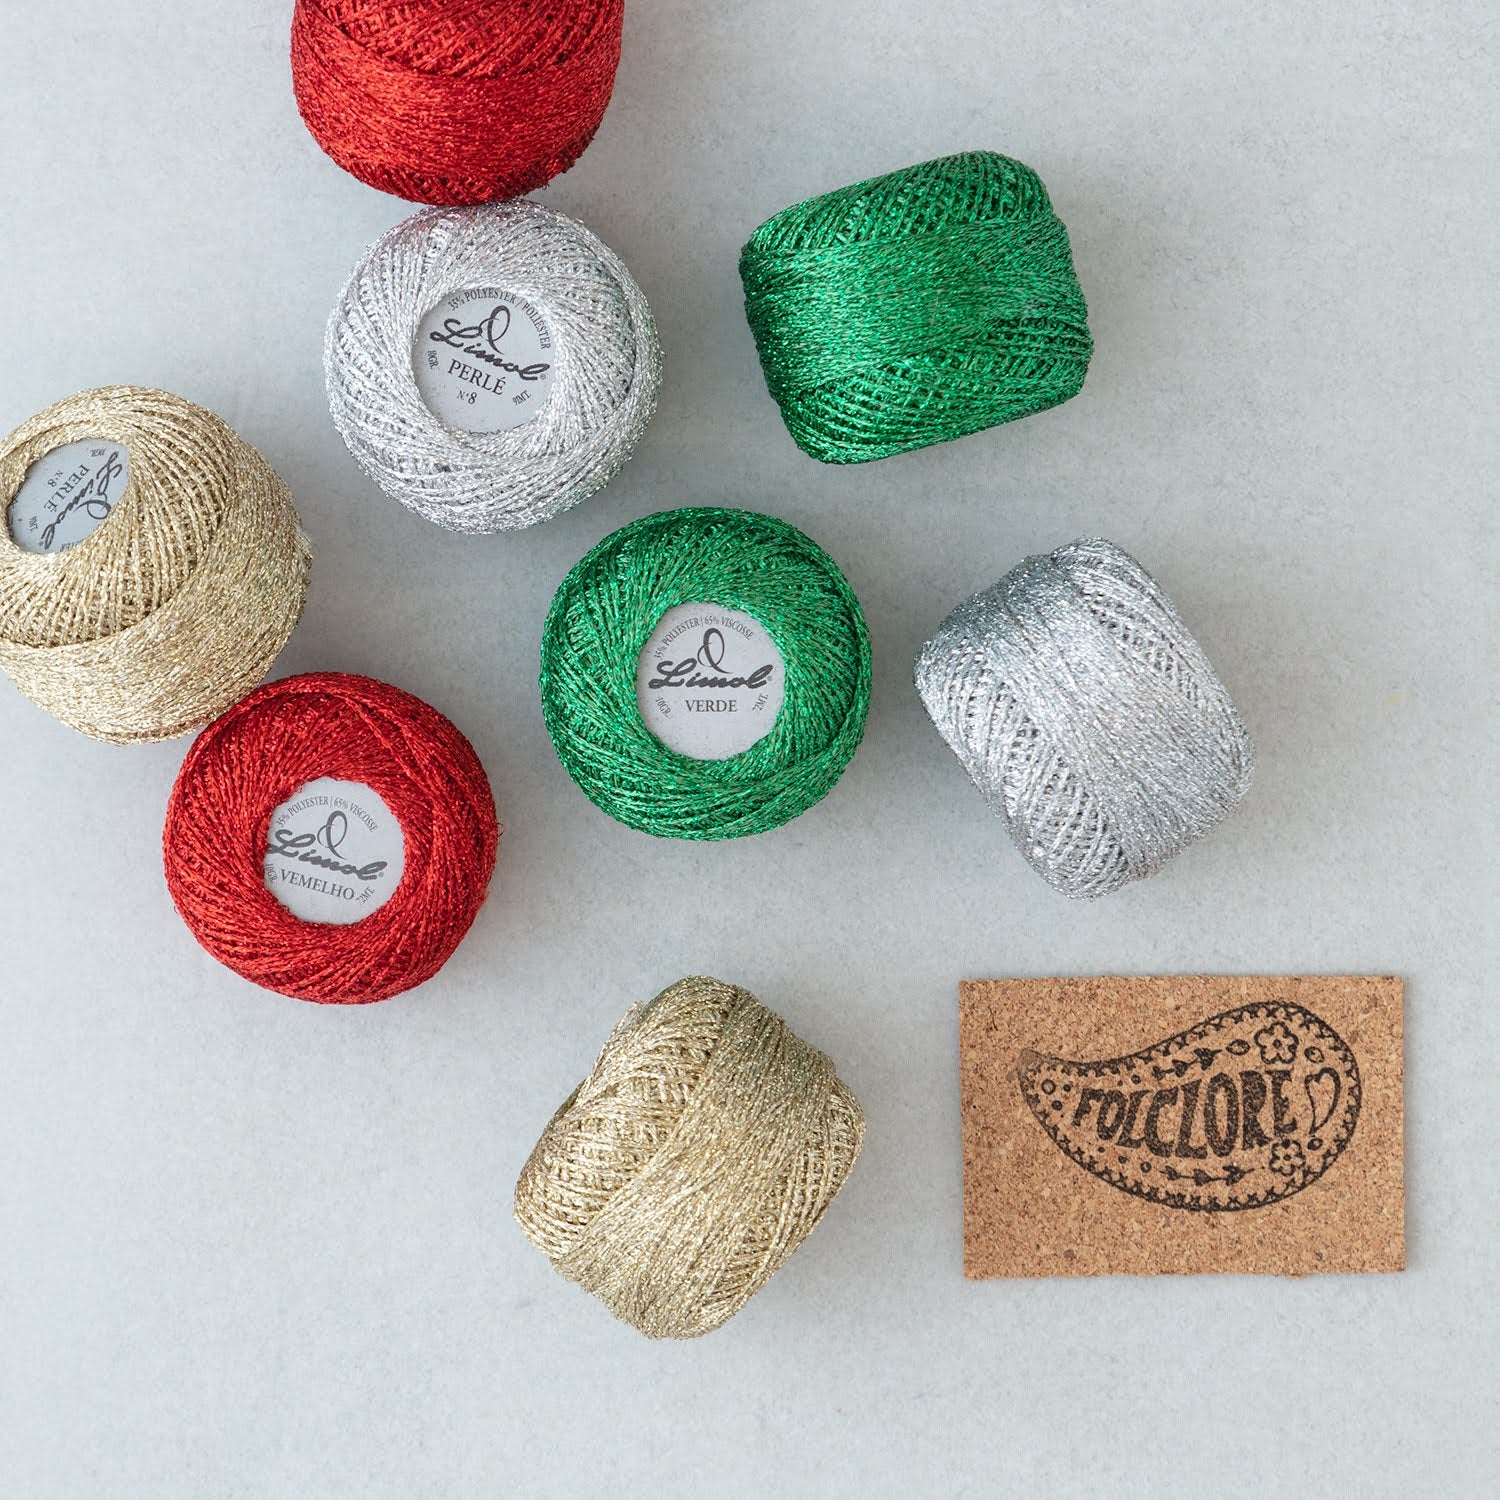 Limol pearl cotton metallic floss - red, green, silver and gold